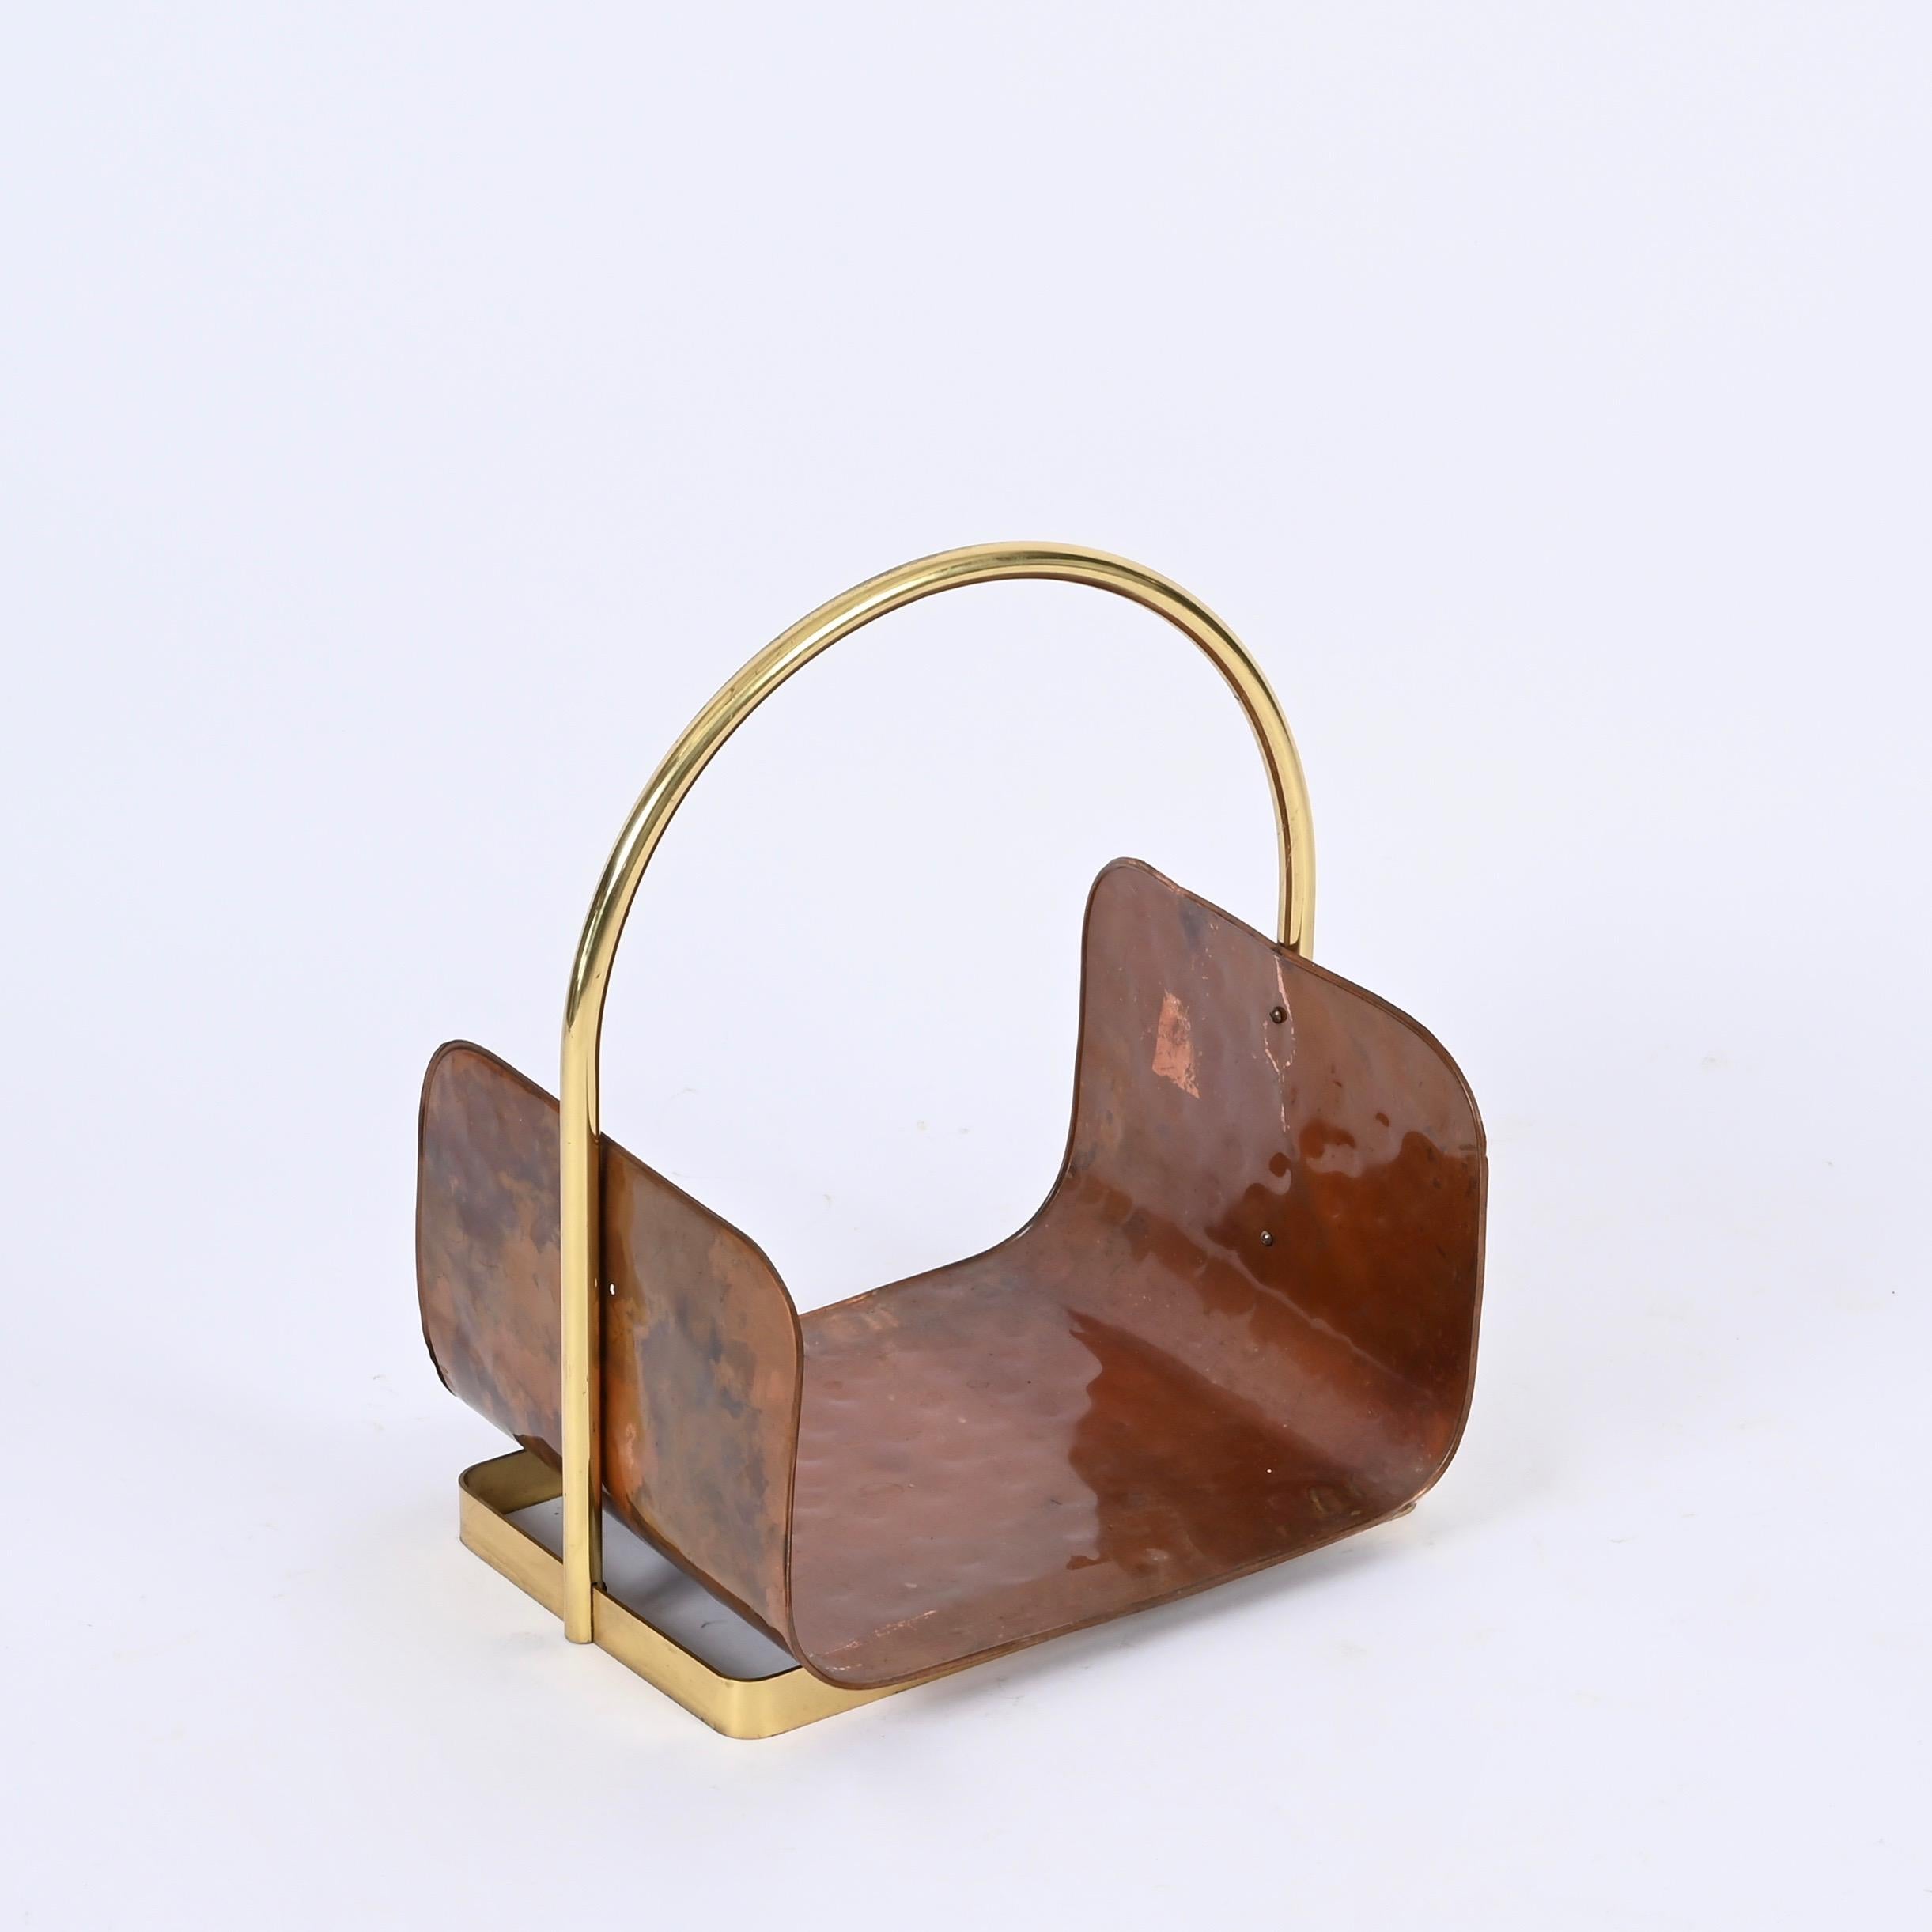 Gorgeous Italian magazine rack fully made in hammered brass with a solid brass handle. This stylish rack was made in Italy during the 1970s. 

This unique magazine stand has a curved U-shaped tray in hammered copper which is enriched by a gilt brass